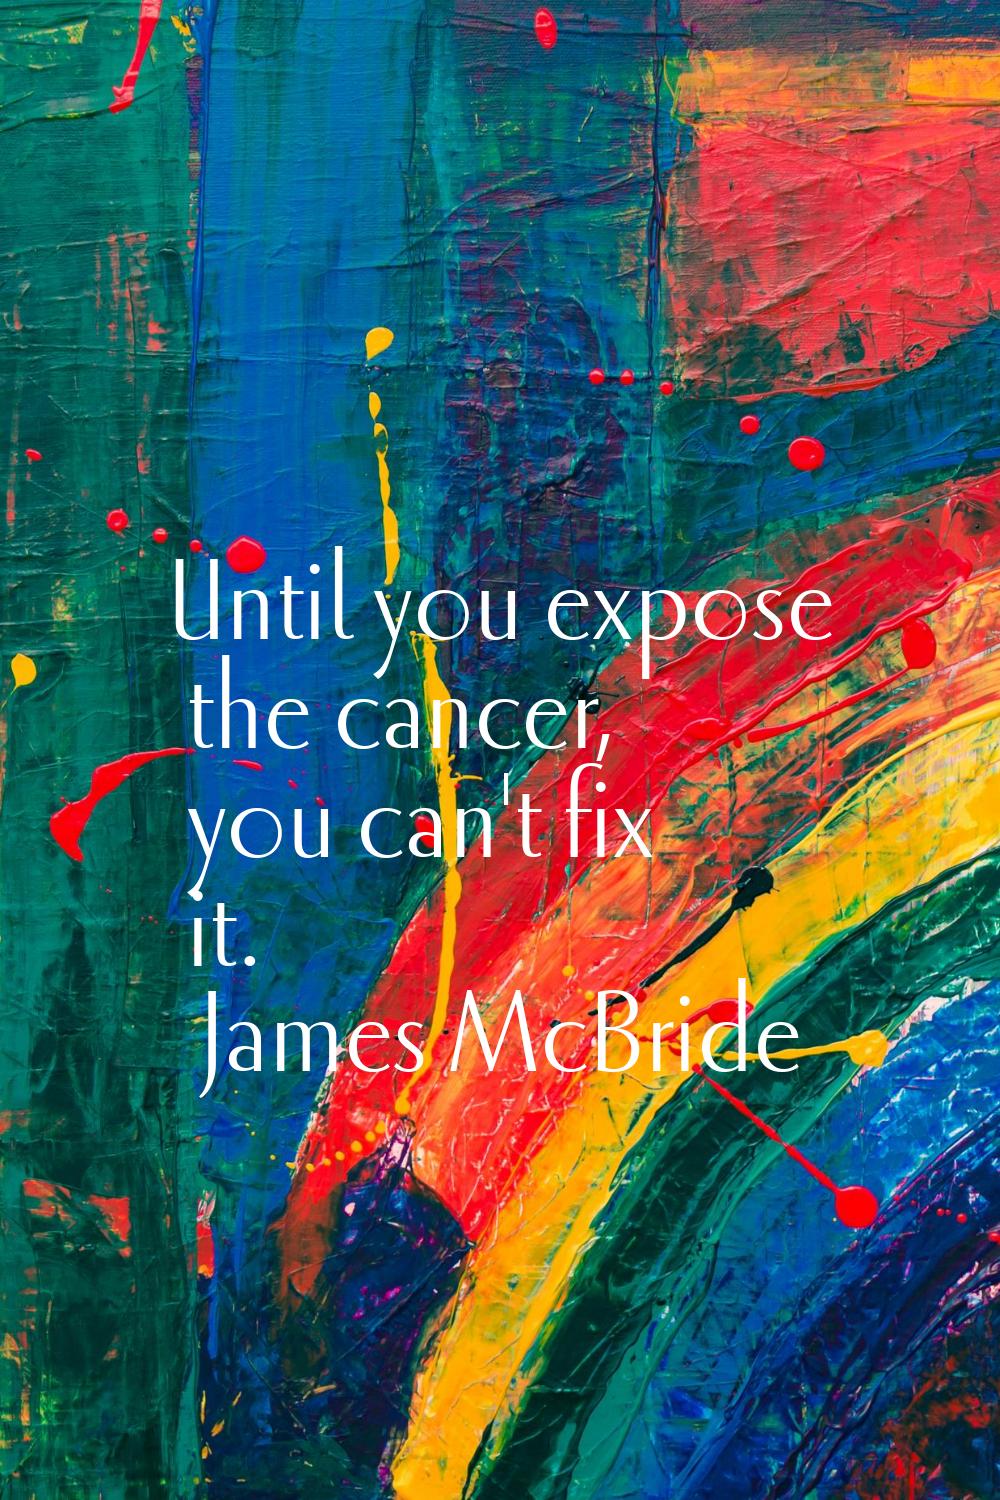 Until you expose the cancer, you can't fix it.